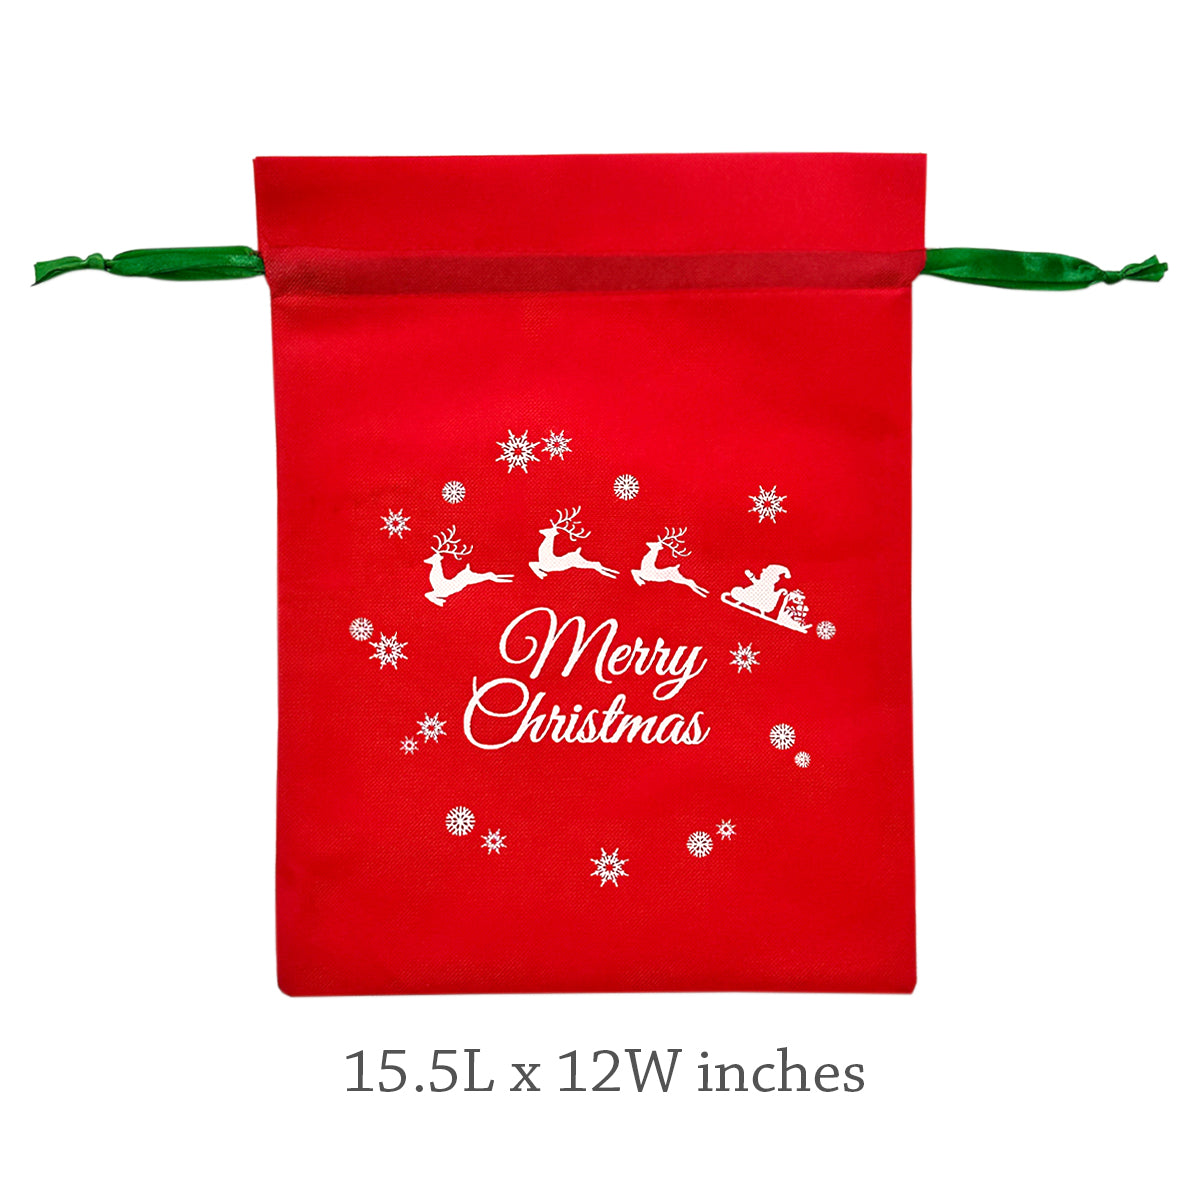 Wrapables Non-Woven Christmas Holiday Drawstring Gift Bags for Party Favors, Goodie Bag, Treats, Gift Wrap, Parties (Set of 8)